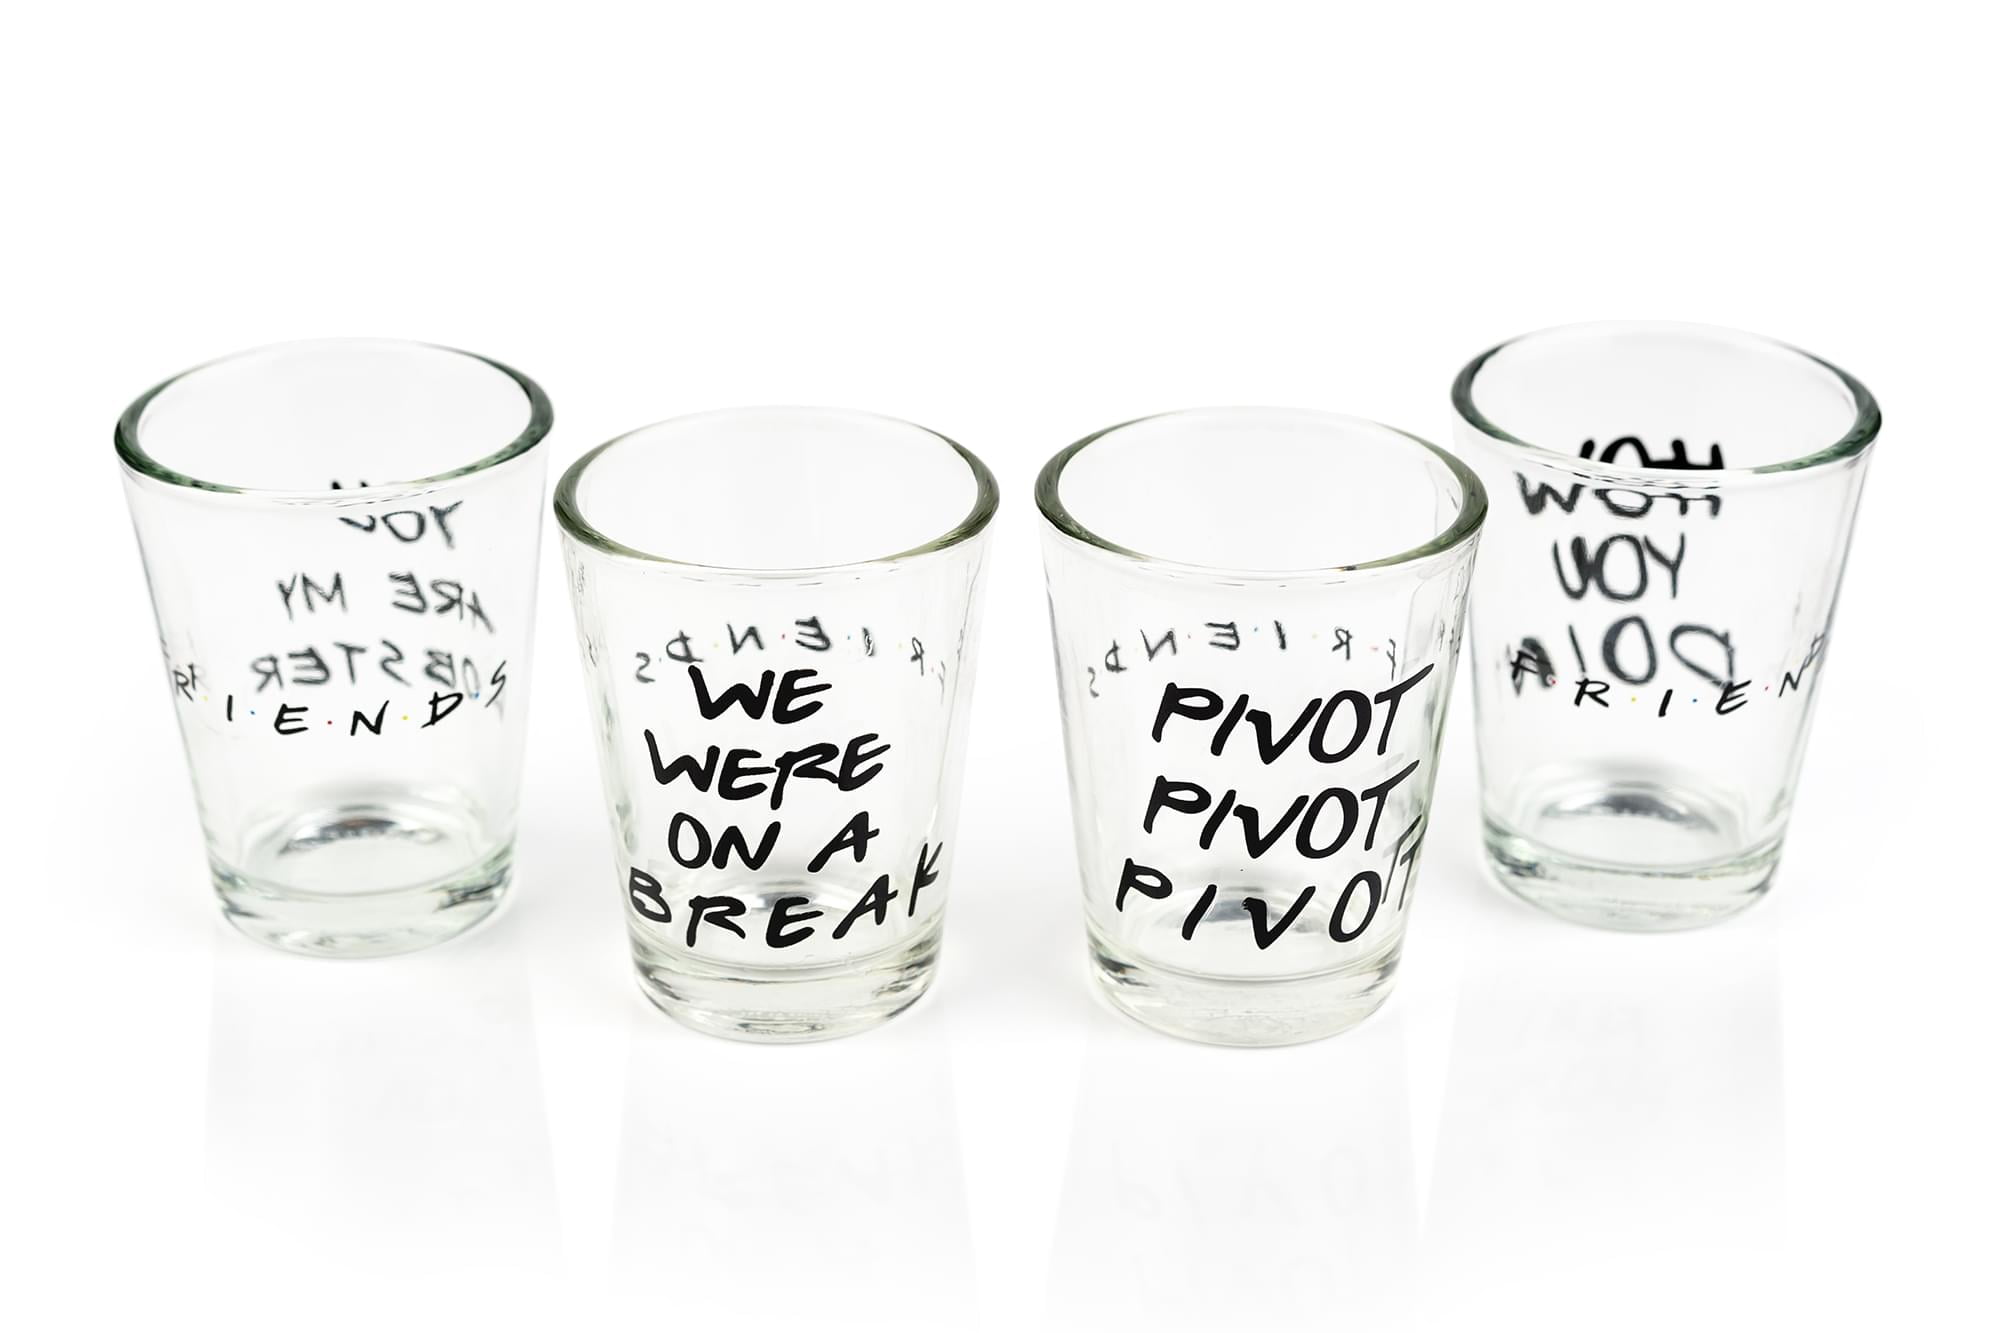 Friends TV Series Shot Glass and Cocktail Mixers Gift Set